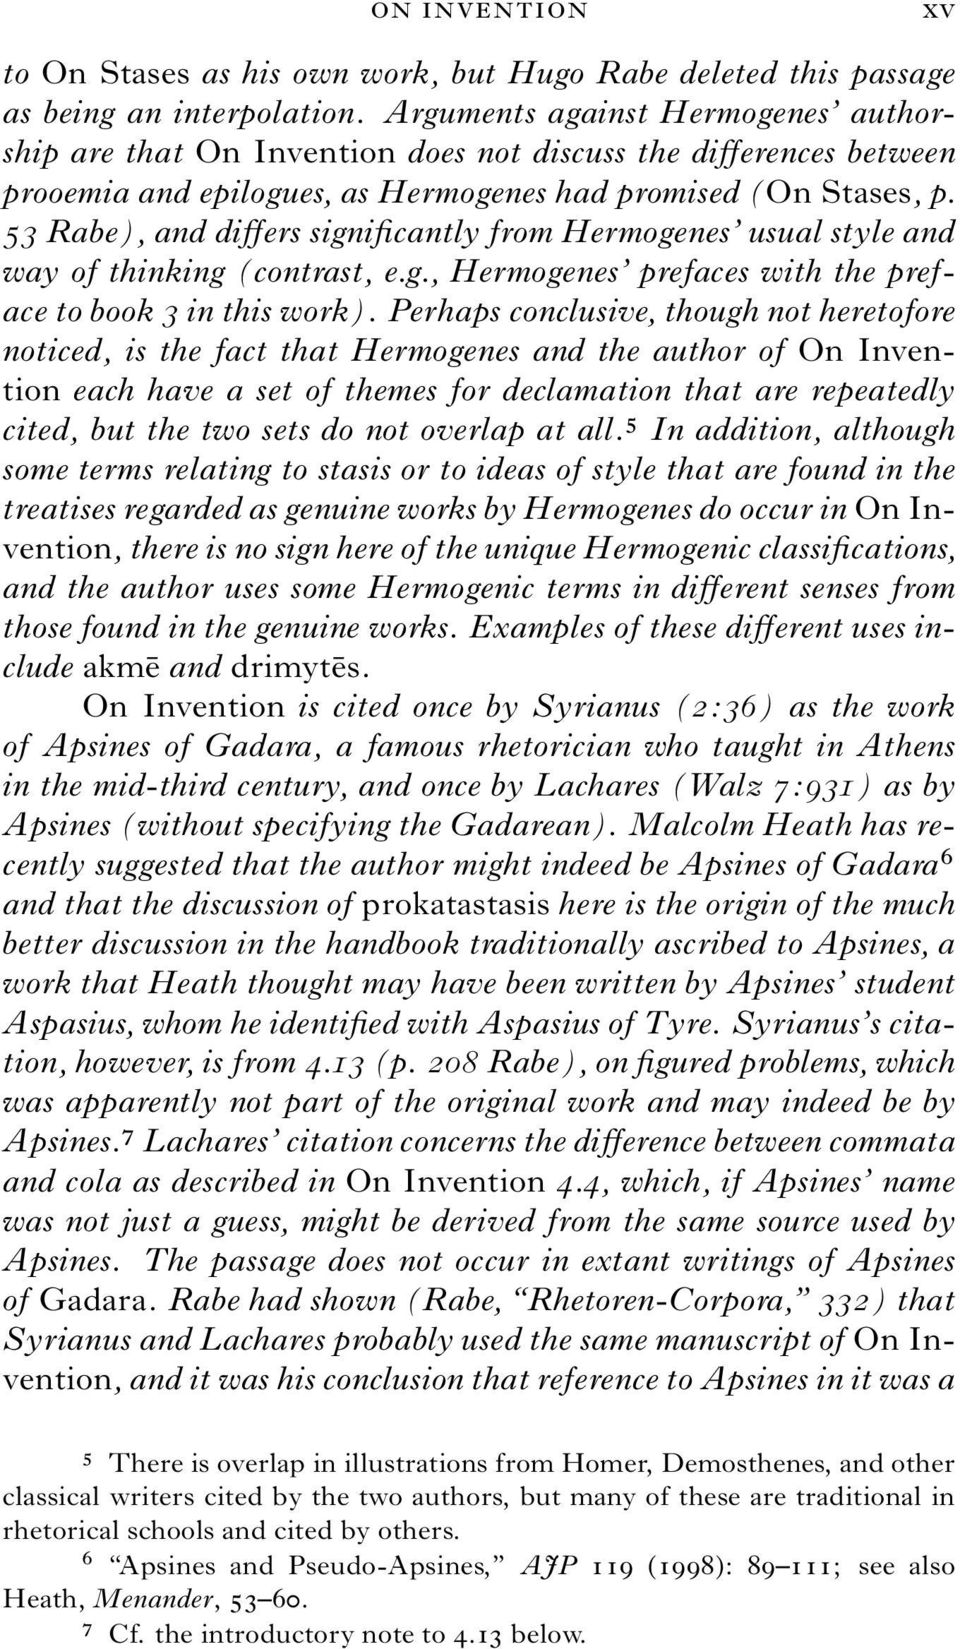 53 Rabe), and differs significantly from Hermogenes usual style and way of thinking (contrast, e.g., Hermogenes prefaces with the preface to book 3 in this work).